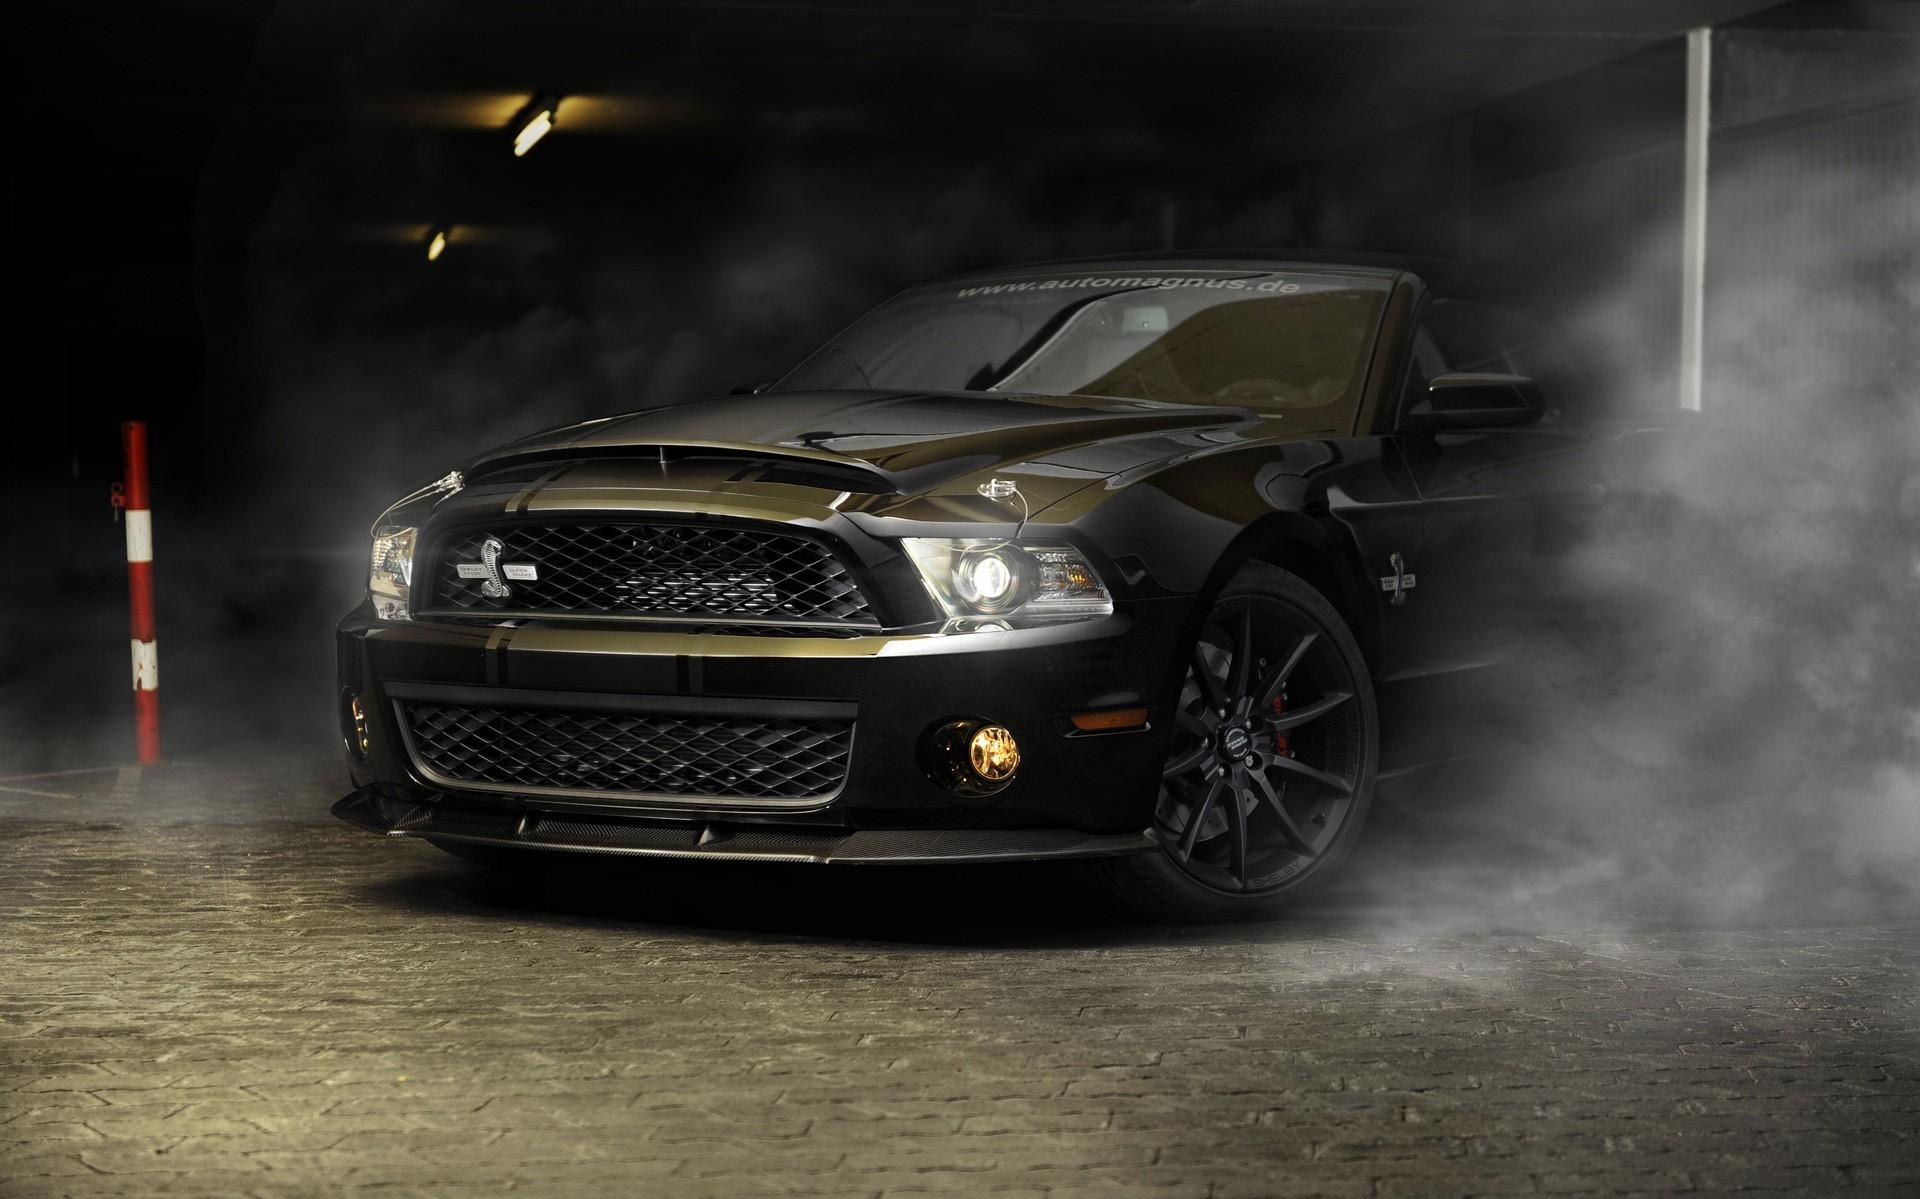 Ford Mustang Shelby Gt500 Drag 4k Rare Gallery HD Wallpaper